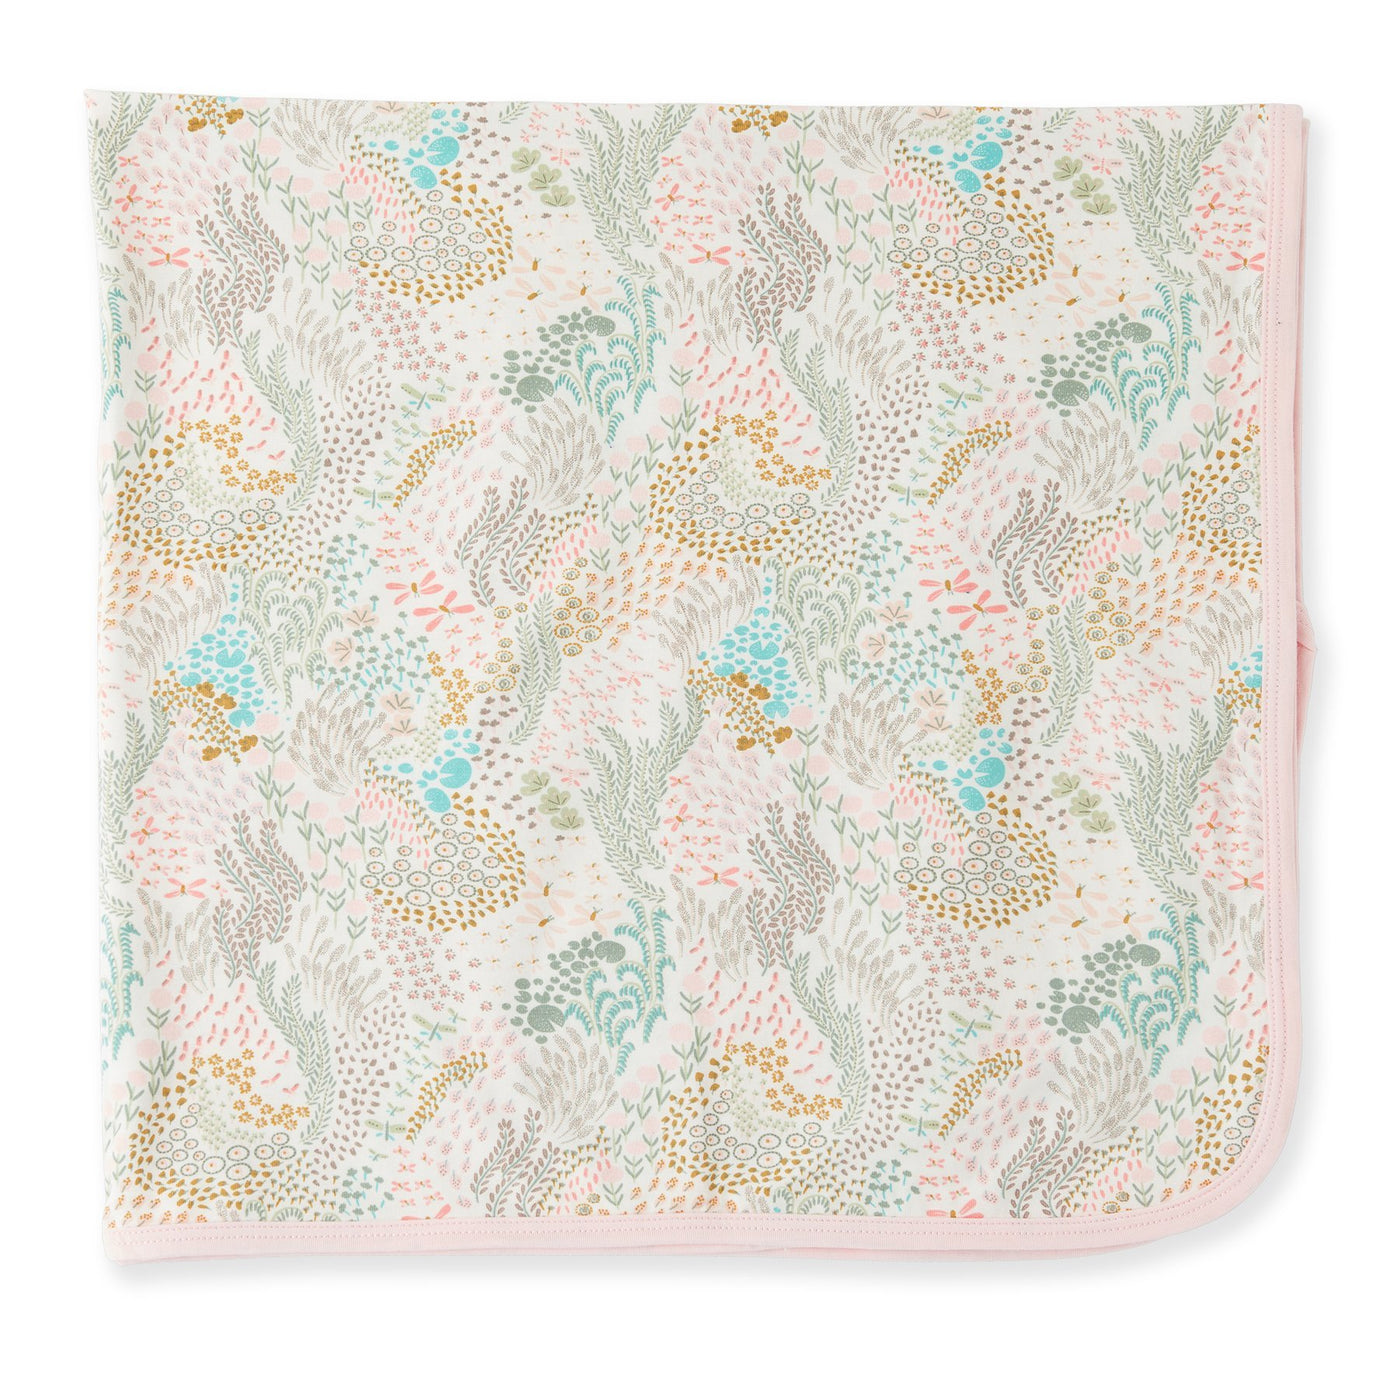 Coral Cay Modal Swaddle Blanket